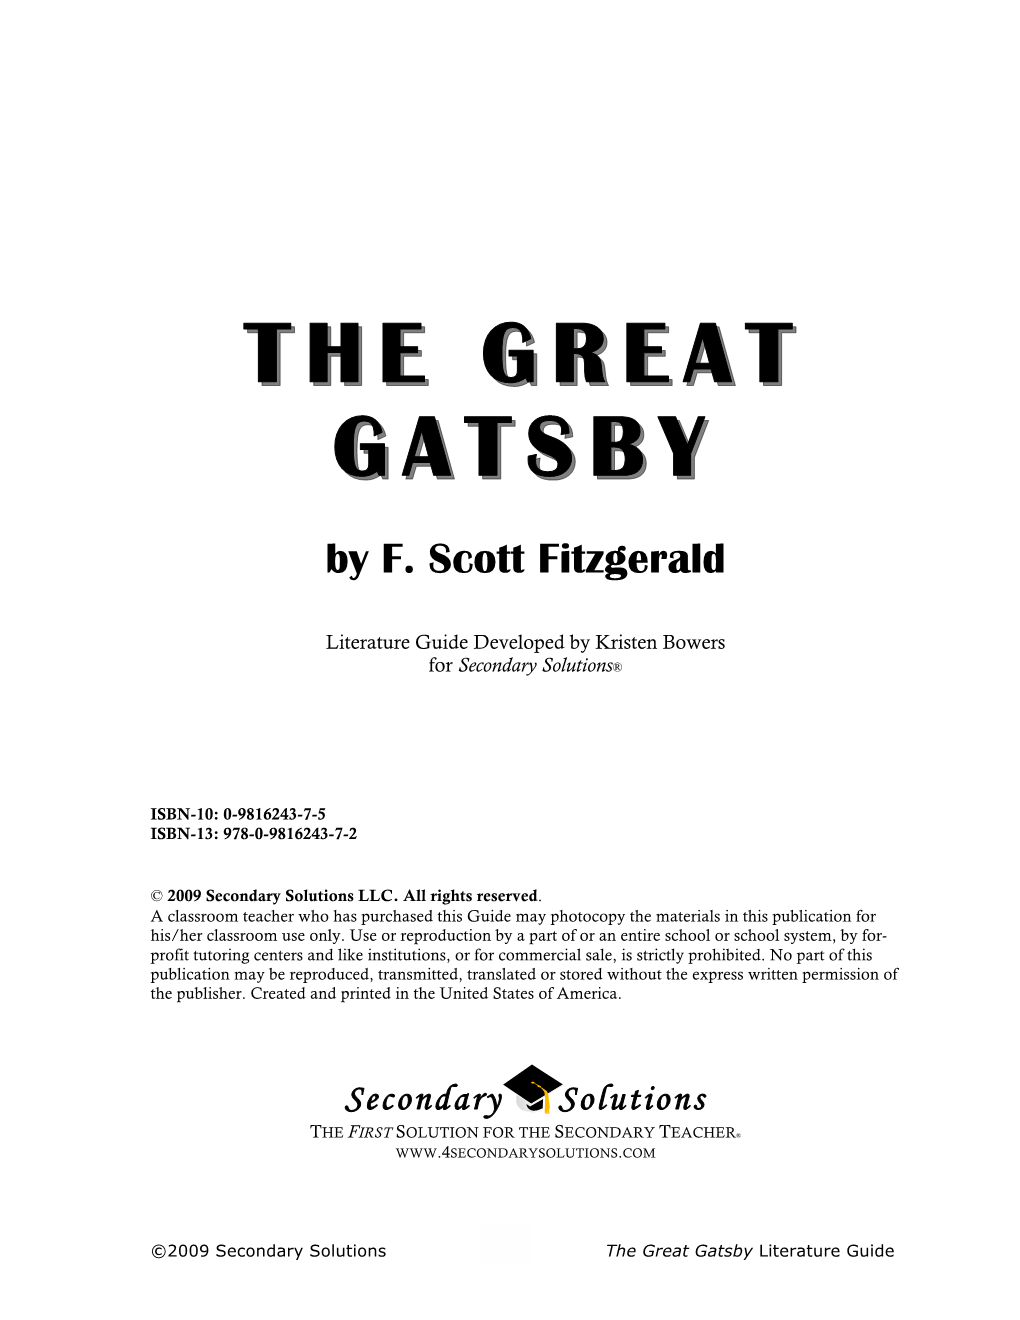 The Great the Great Gatsby